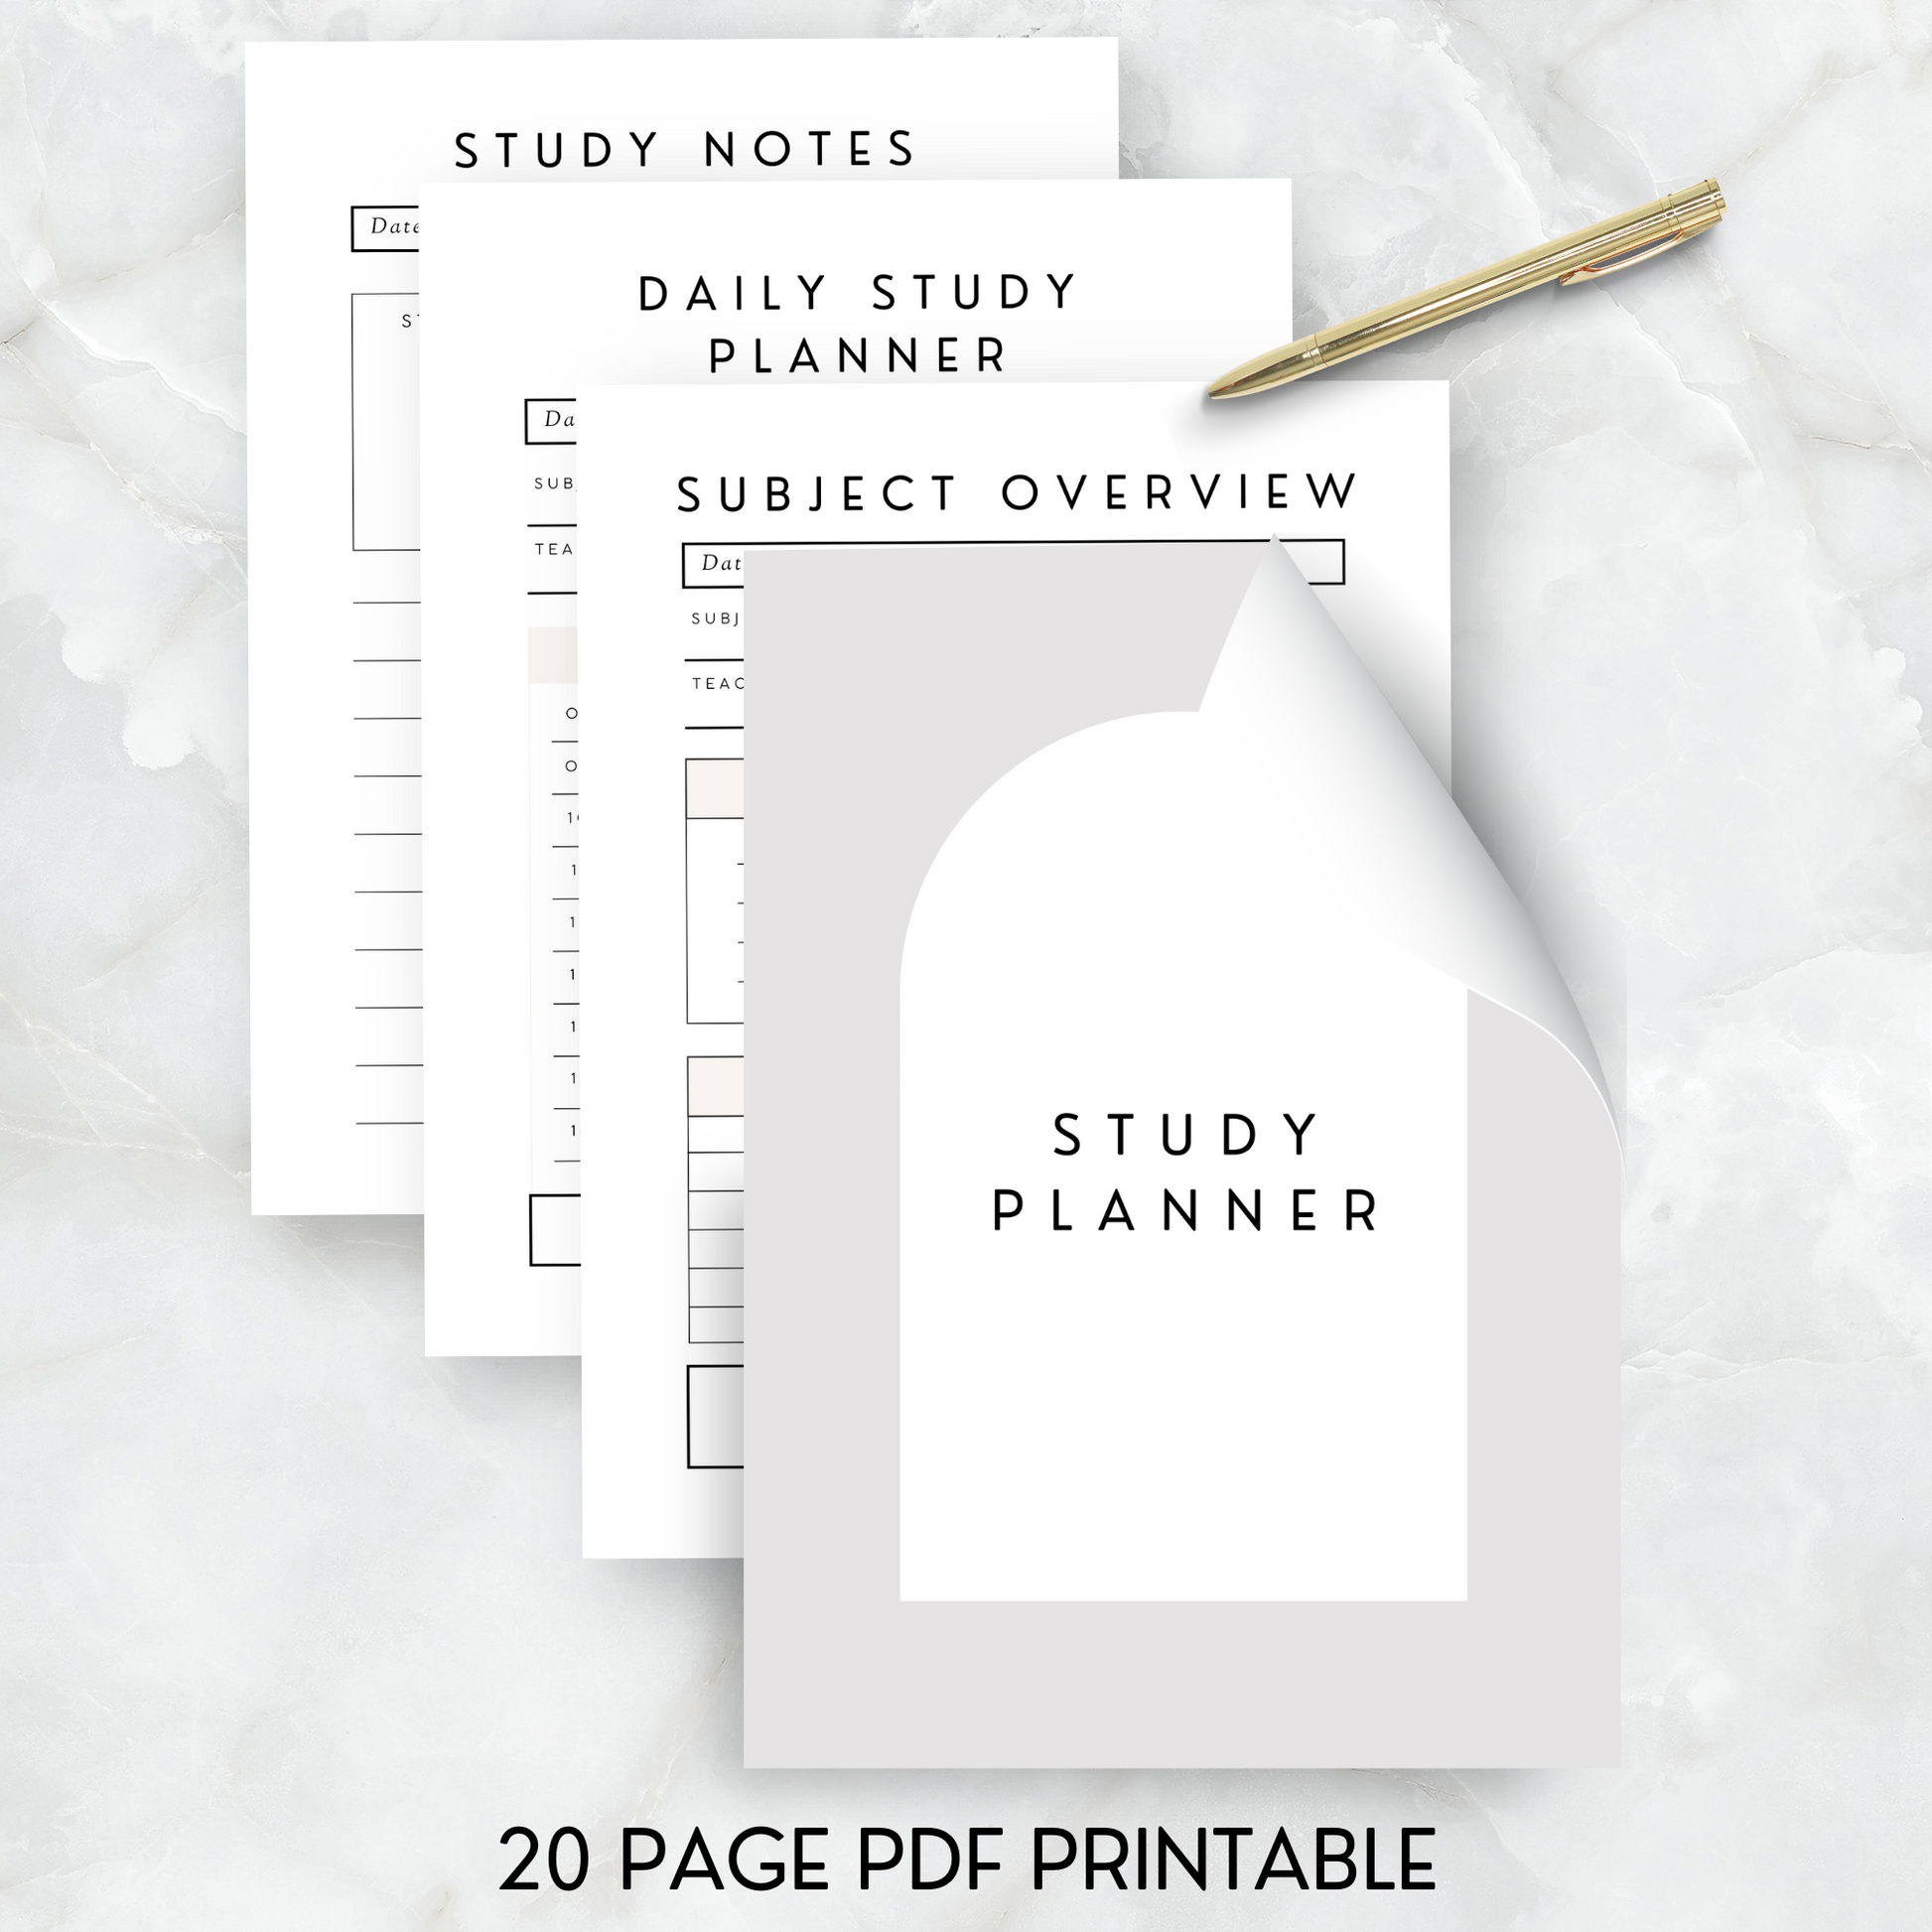 PDF printable study planner and homework / assignment tracker